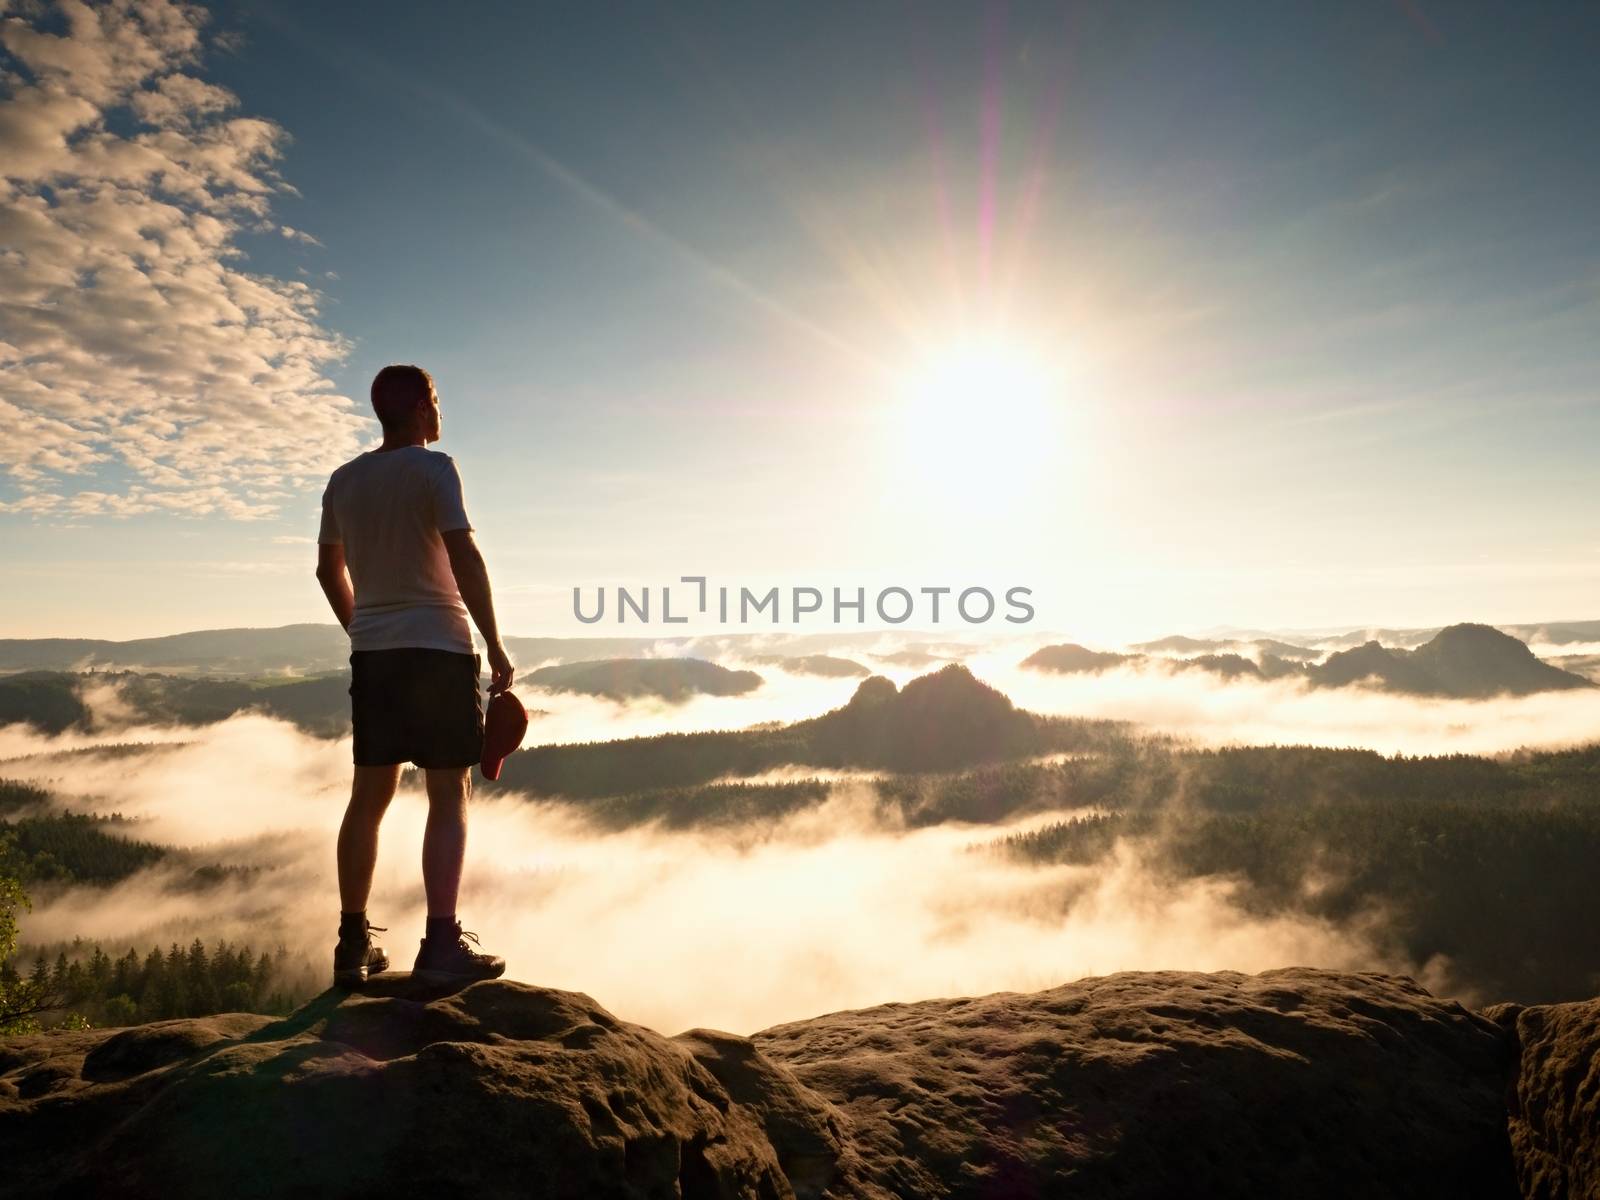 Tourist with red baseball cap sporty shorts stand on cliff edge by rdonar2